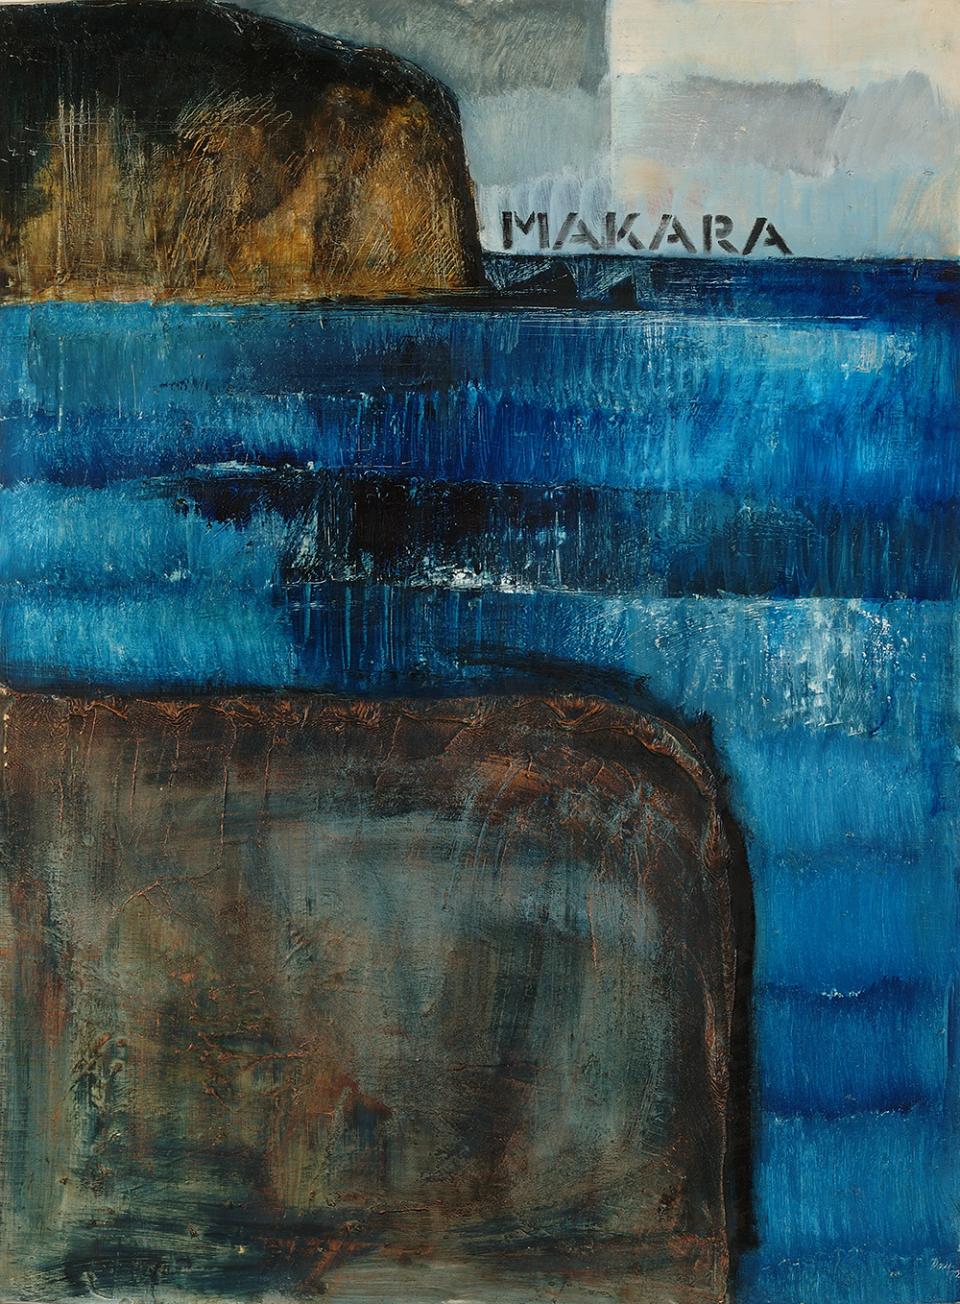 Melvin Day, Makara (1972), oil on canvas, Collection of Aratoi Wairarapa Museum of Art and History. Norman Prior bequest. Courtesy of the Oroya and Melvin Day Charitable Trust.